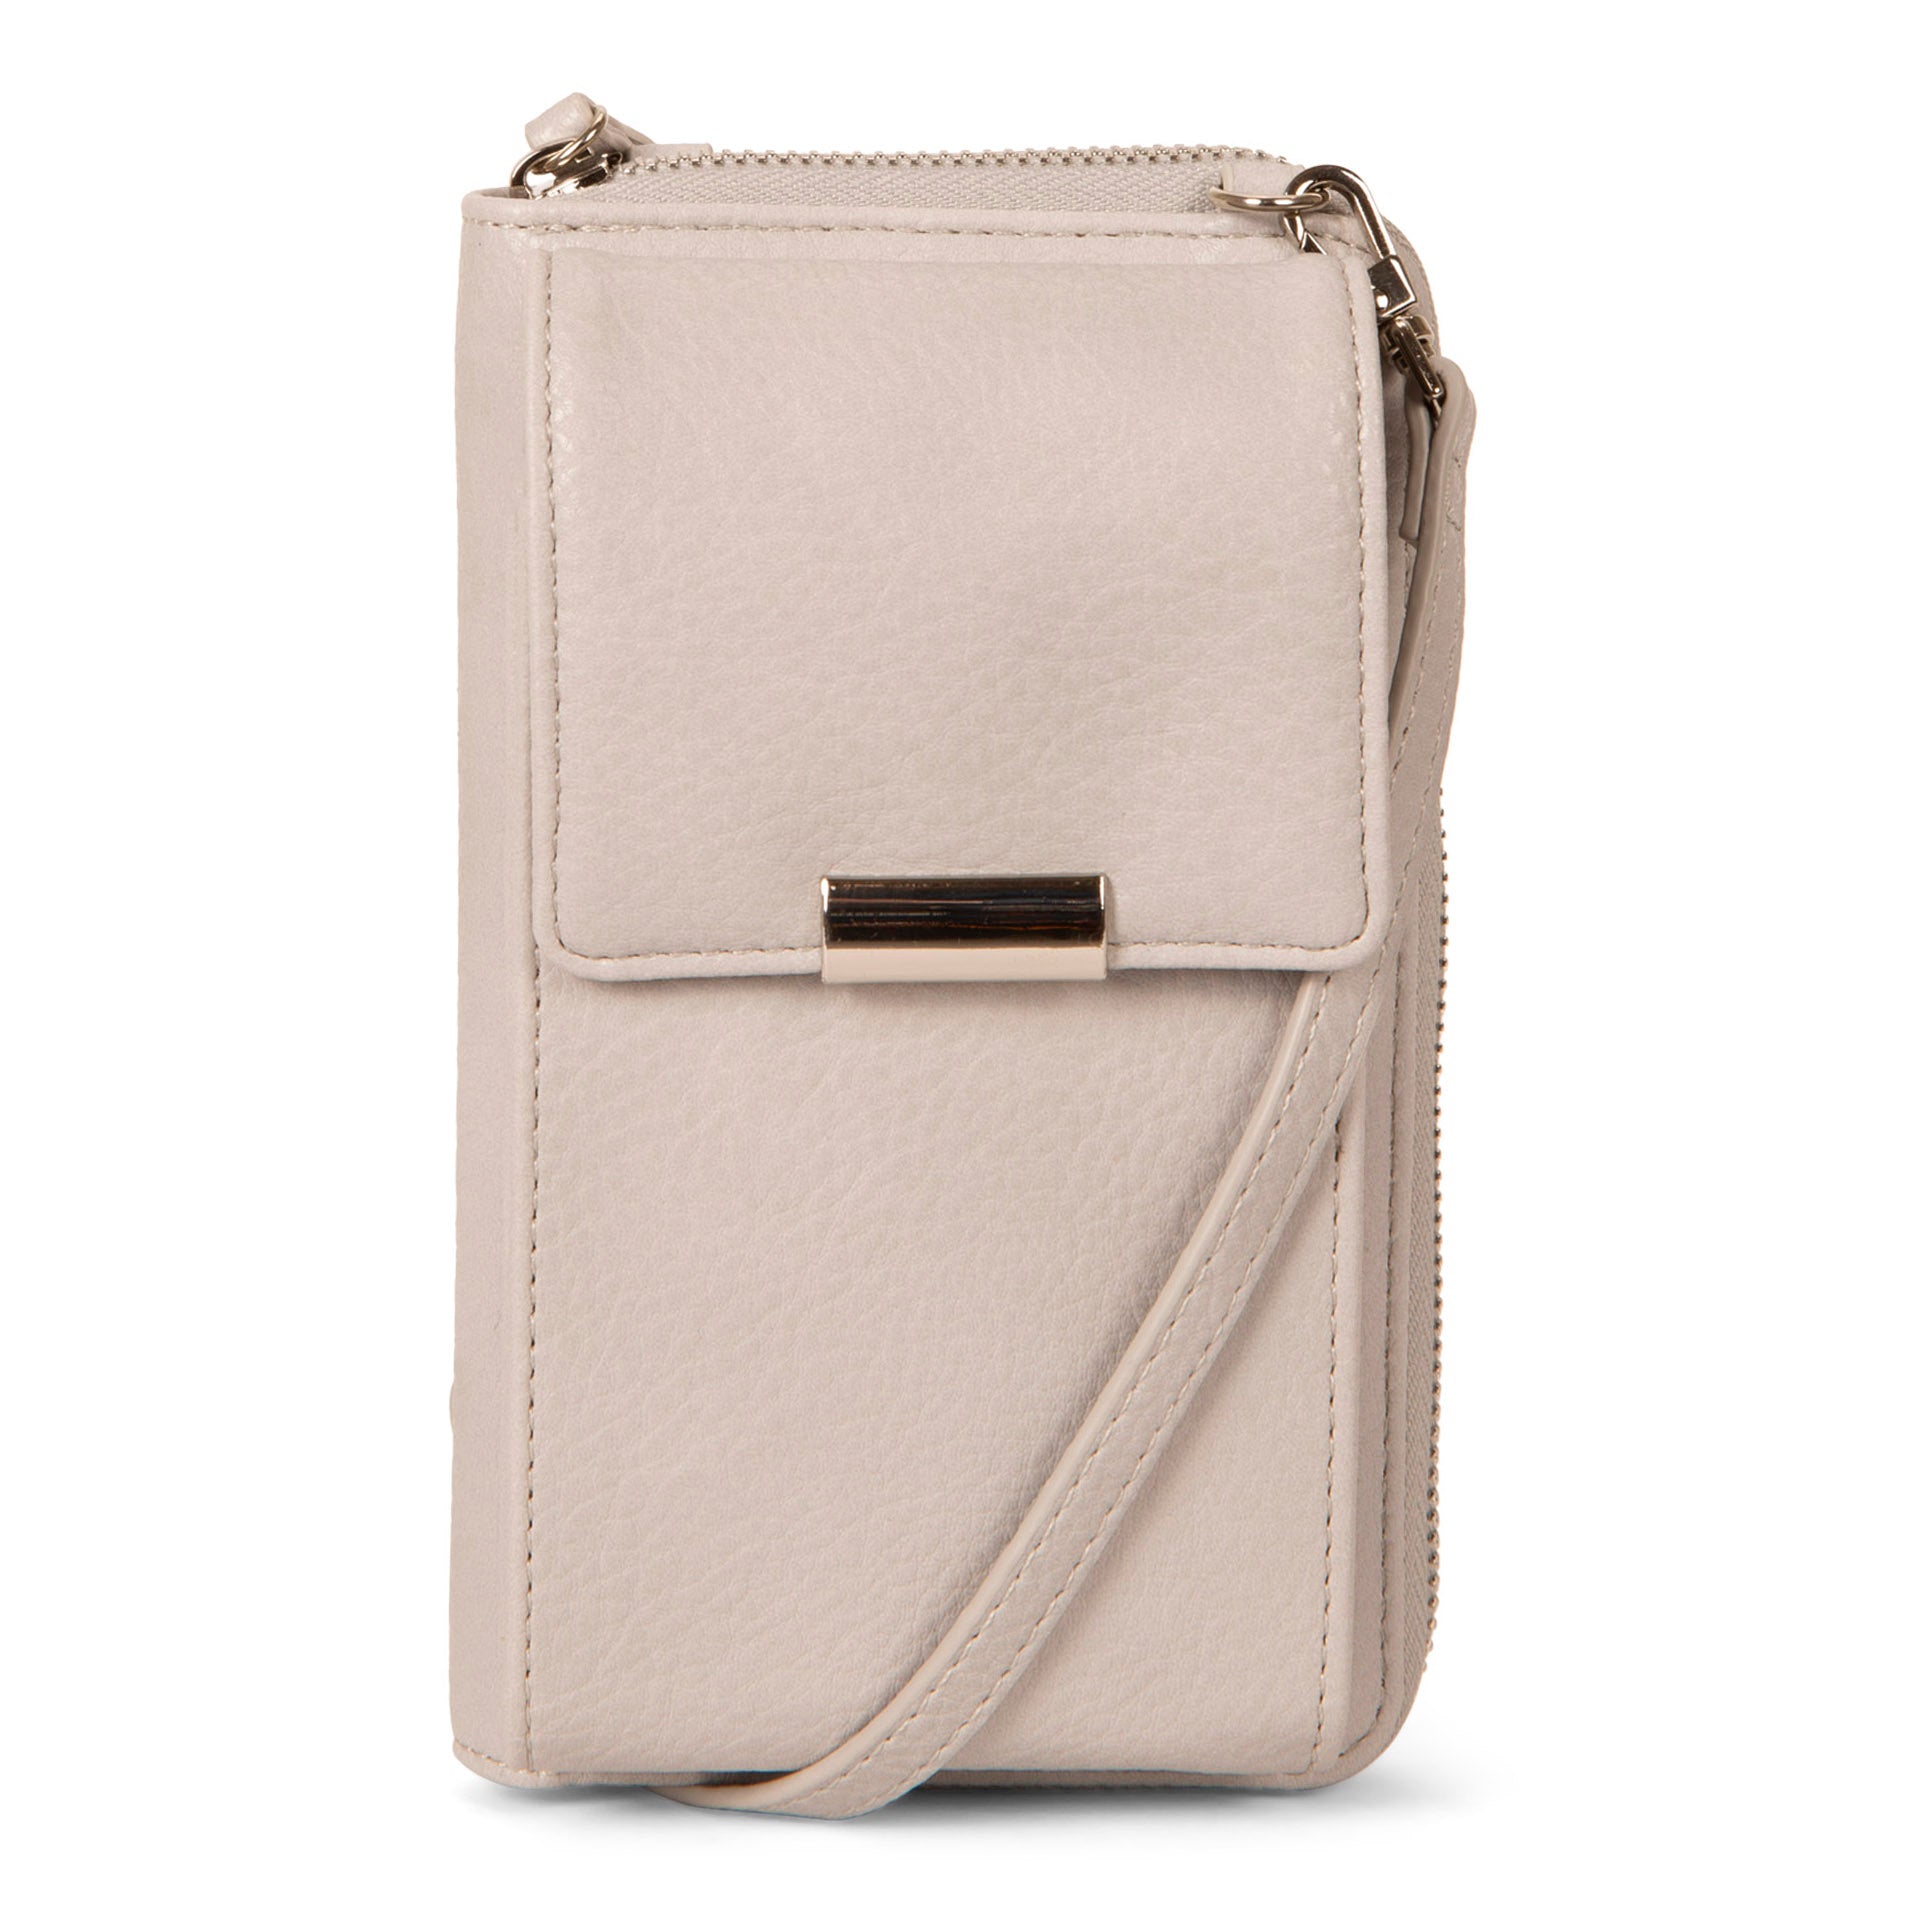 HUANLANG Small Crossbody Phone Bags for Women Leather Cell Phone Purse  Wallet: Handbags: Amazon.com